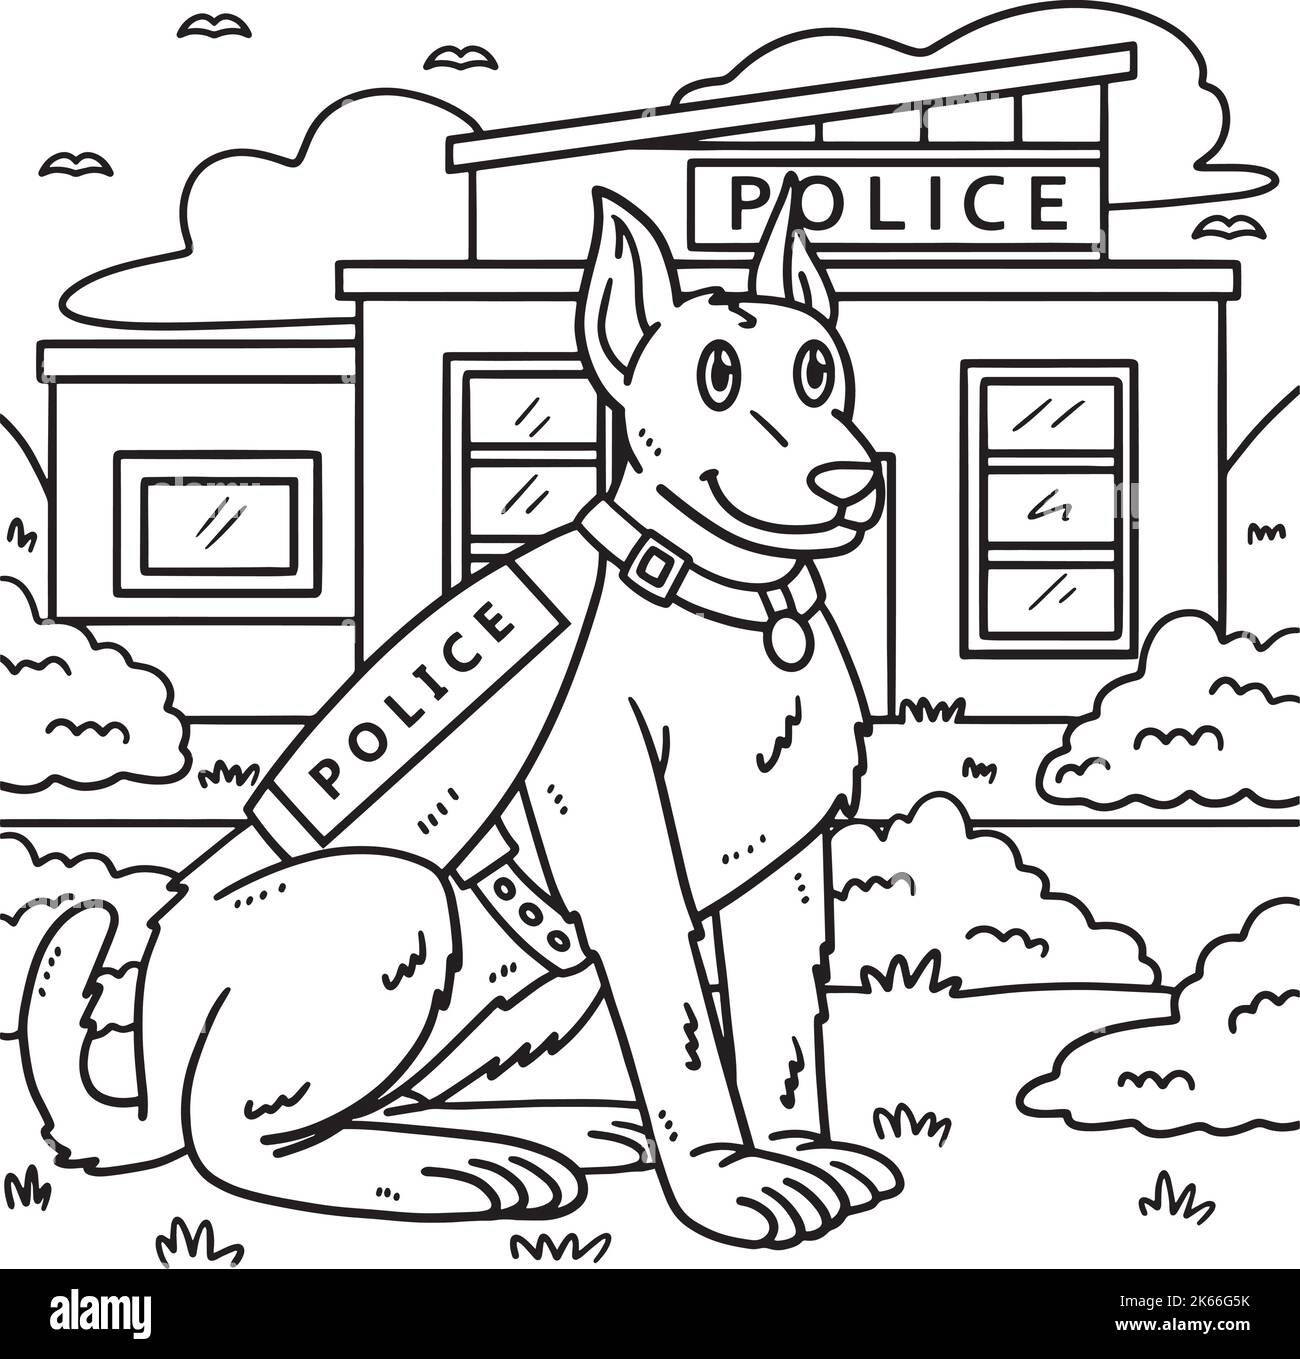 Police Dog Coloring Page for Kids Stock Vector